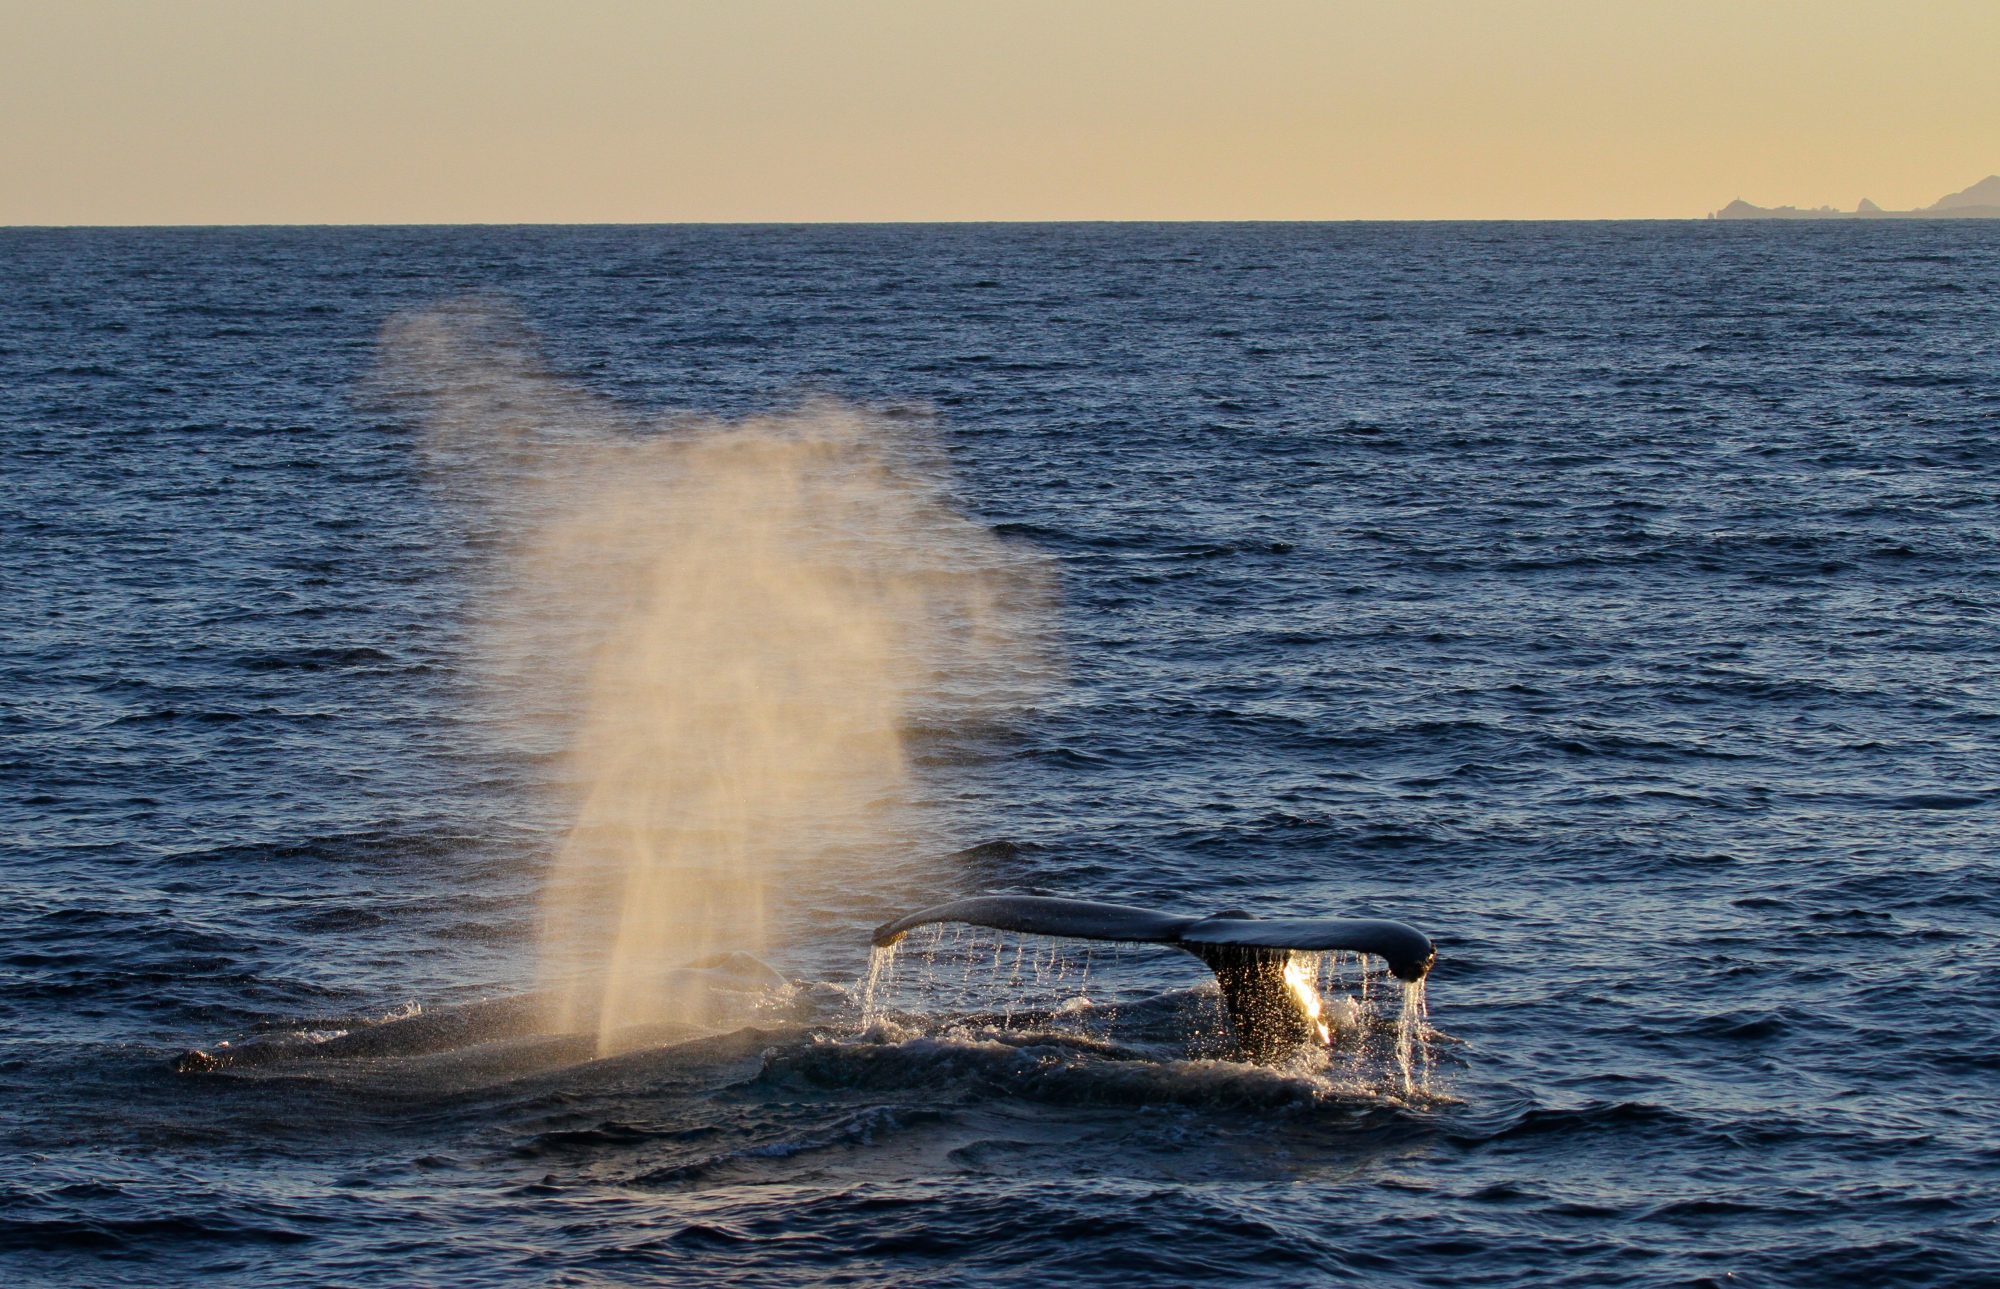 Humpback Whales at sunset – Sea of Cortez, Mexico 2017